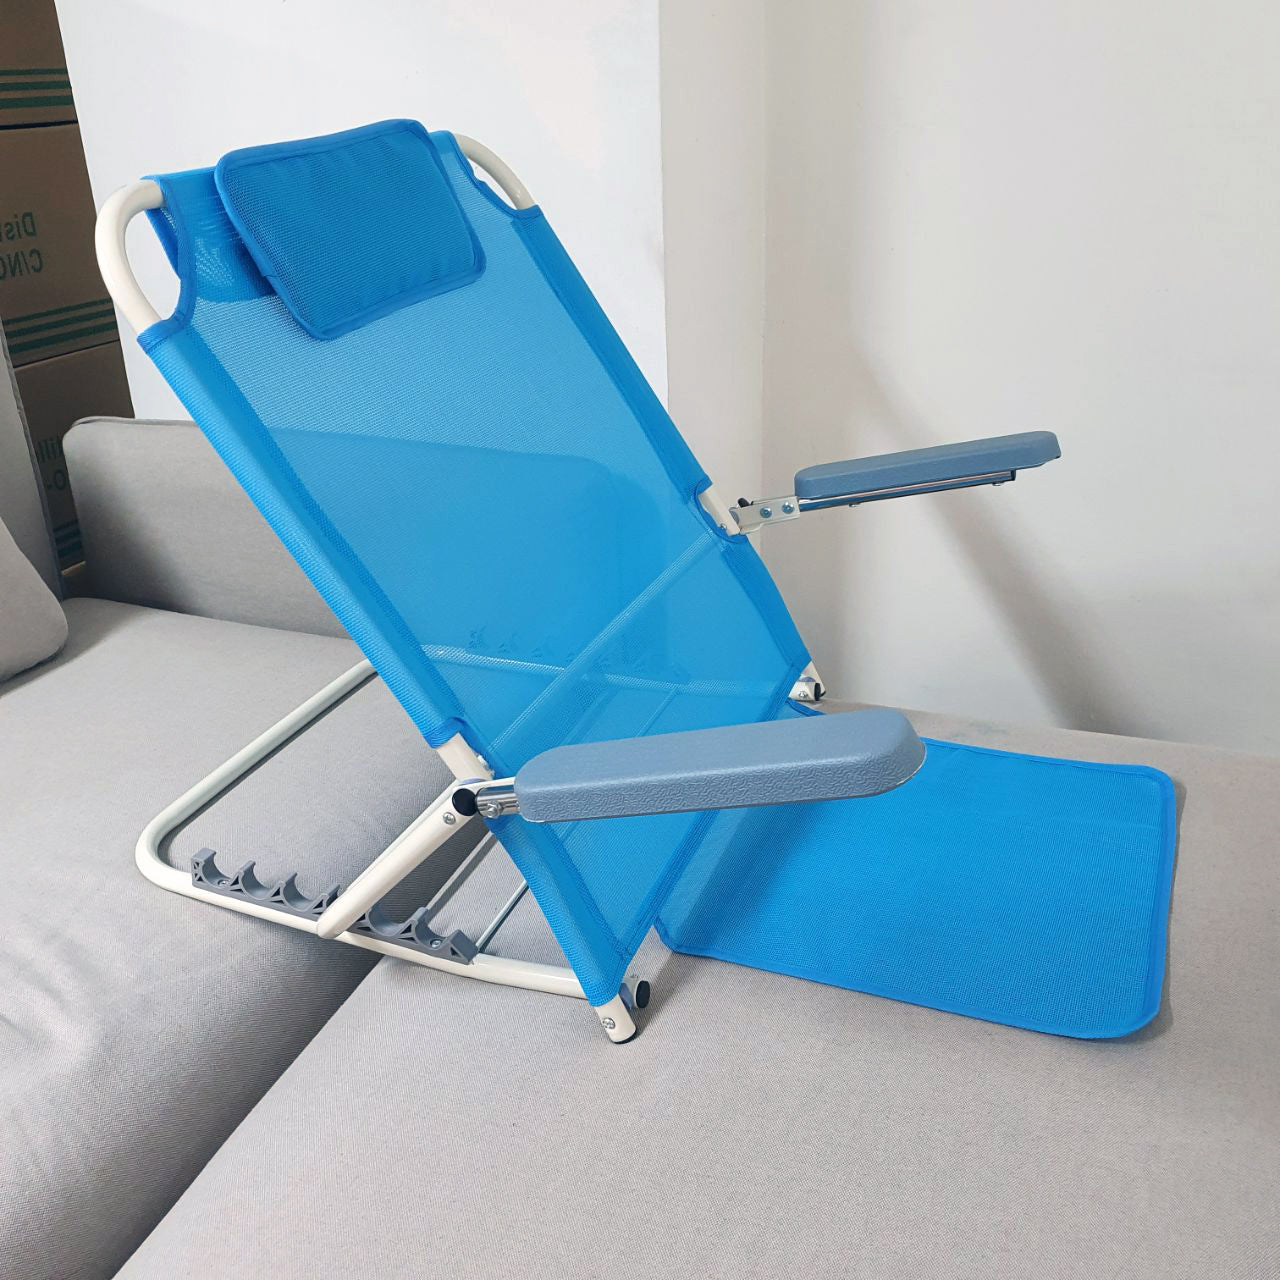 suneagoo 5-level Adjustable Bed Back Support,Foldable Bed Support with  Adjustable Armrests and Headrest,Breathable Backrest Support Used for  Patient